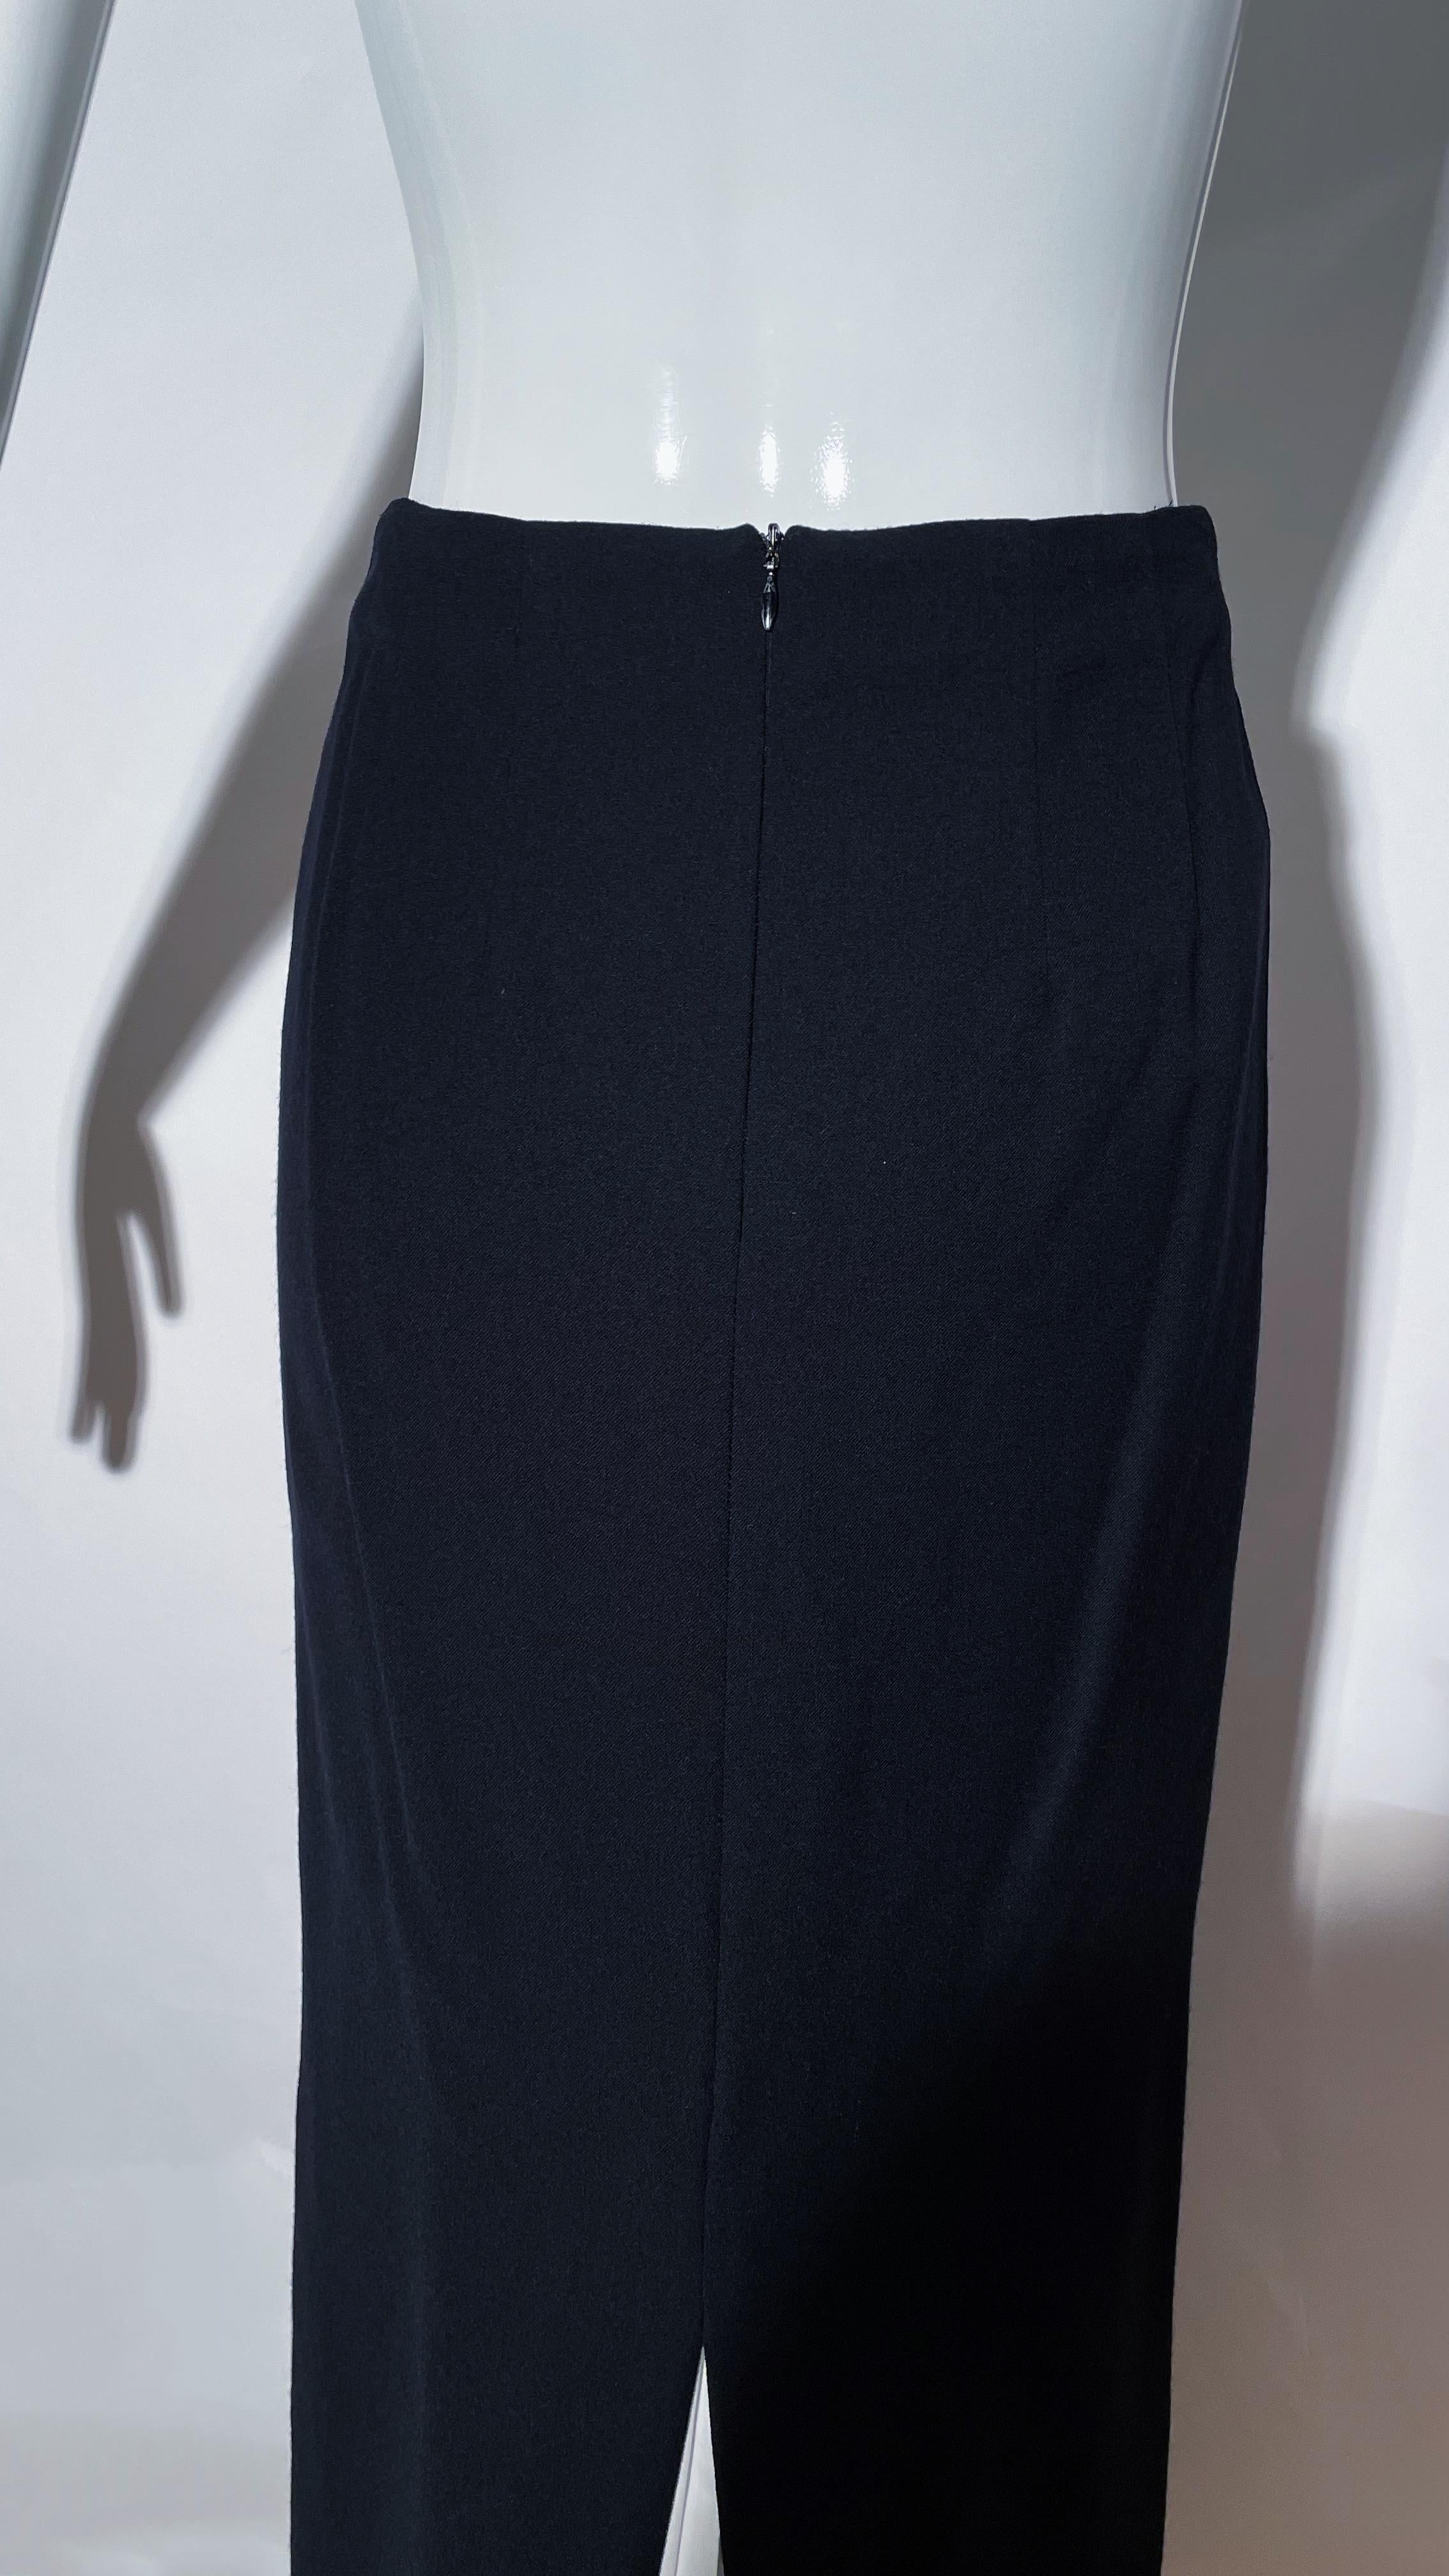 Dries Van Noten Skirt with Slip In Excellent Condition For Sale In Waterford, MI